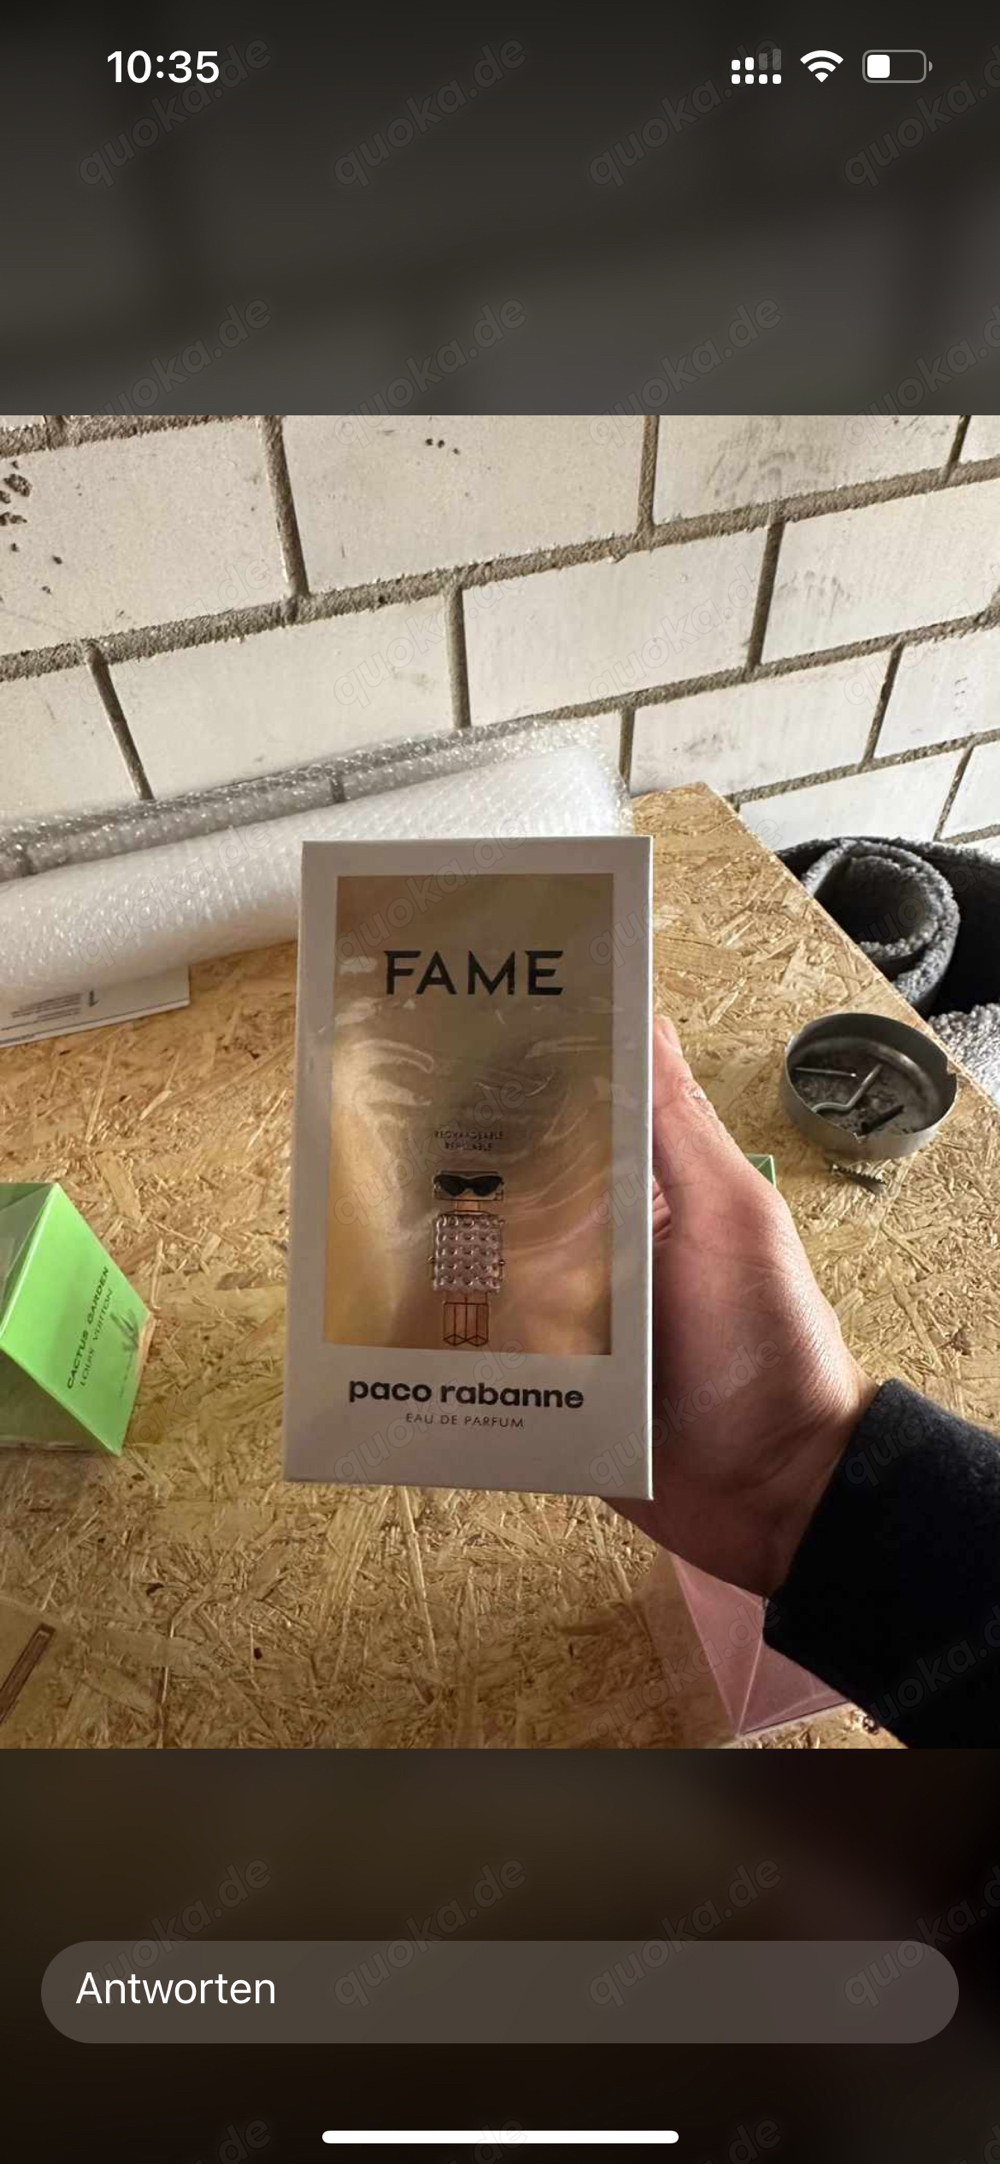 fame paco rabanne duft